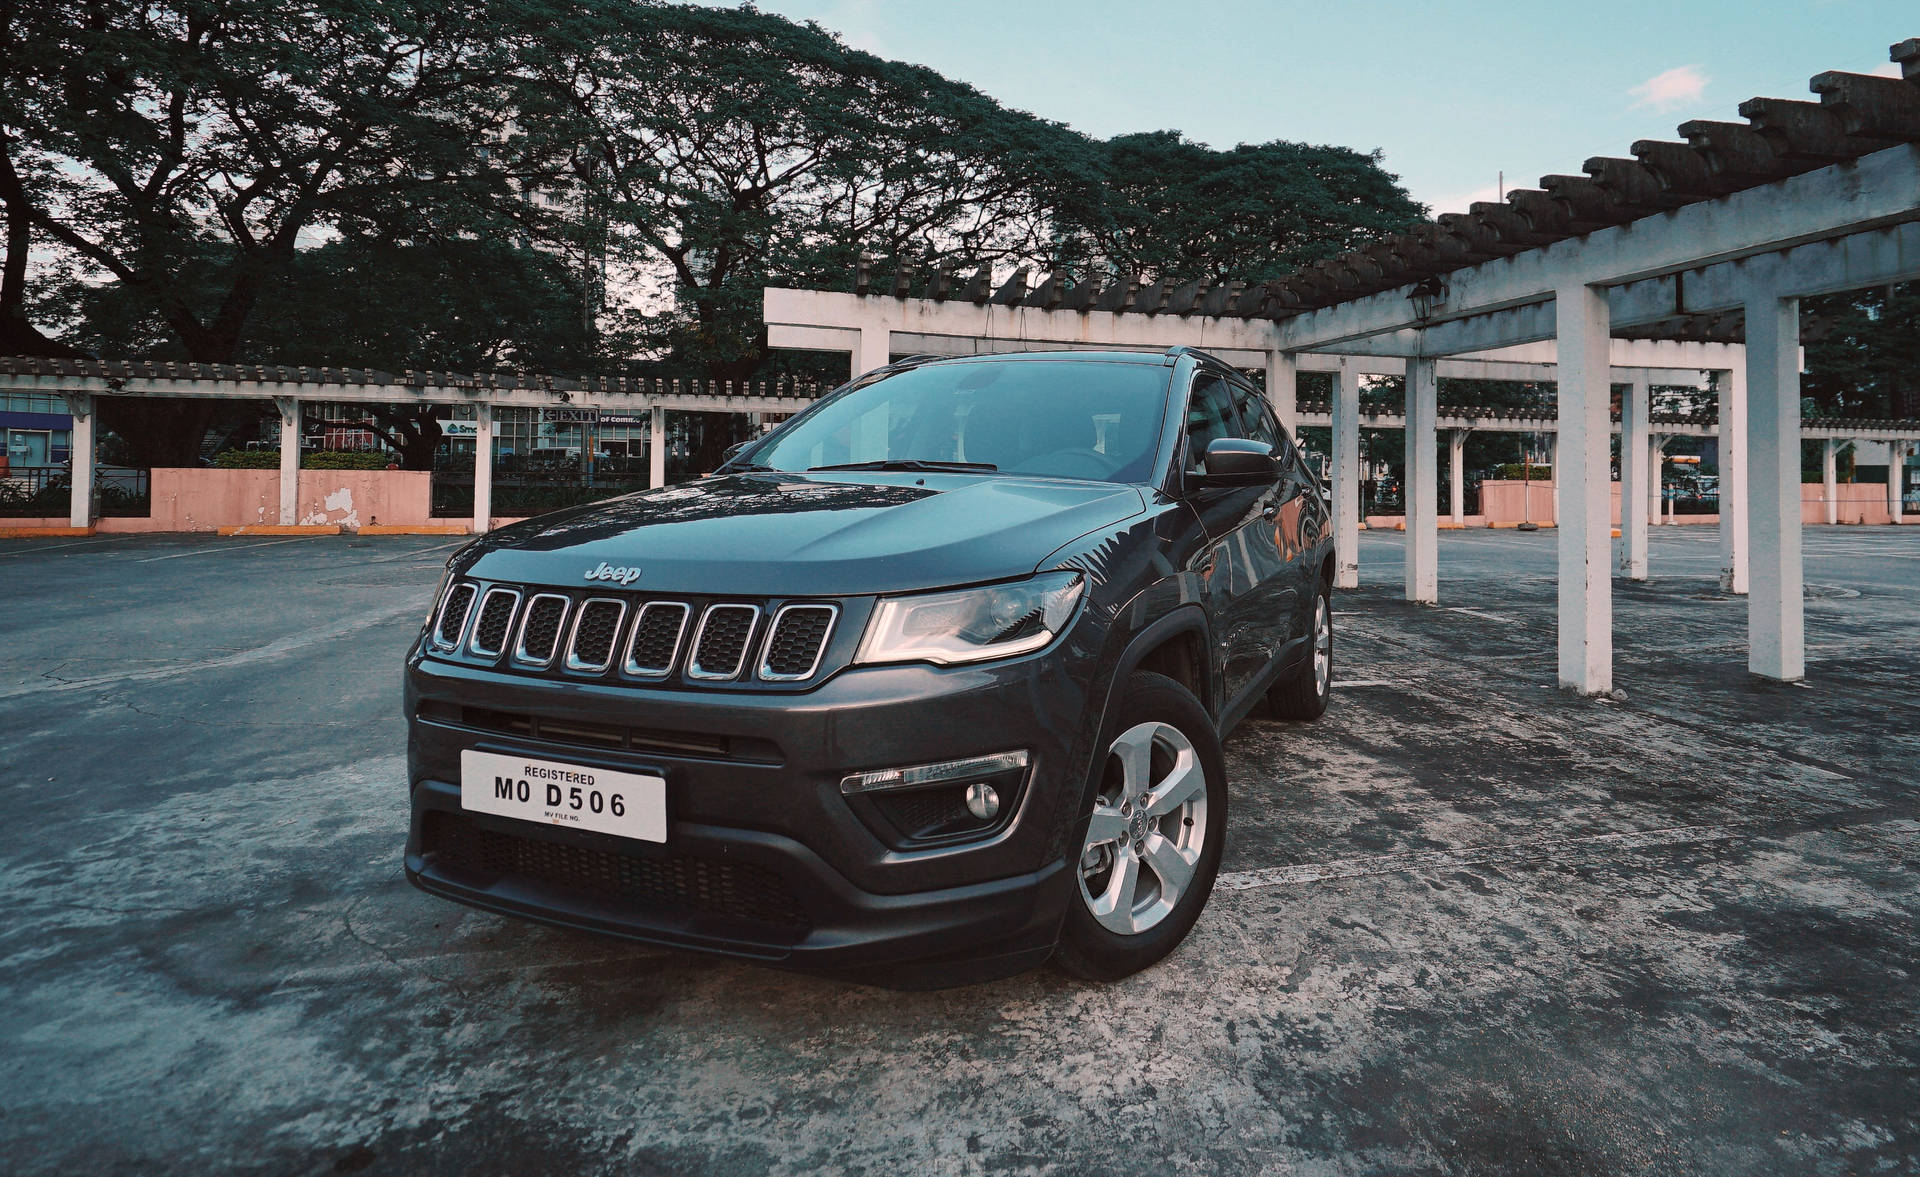 Captivating Jeep Compass Front View Wallpaper